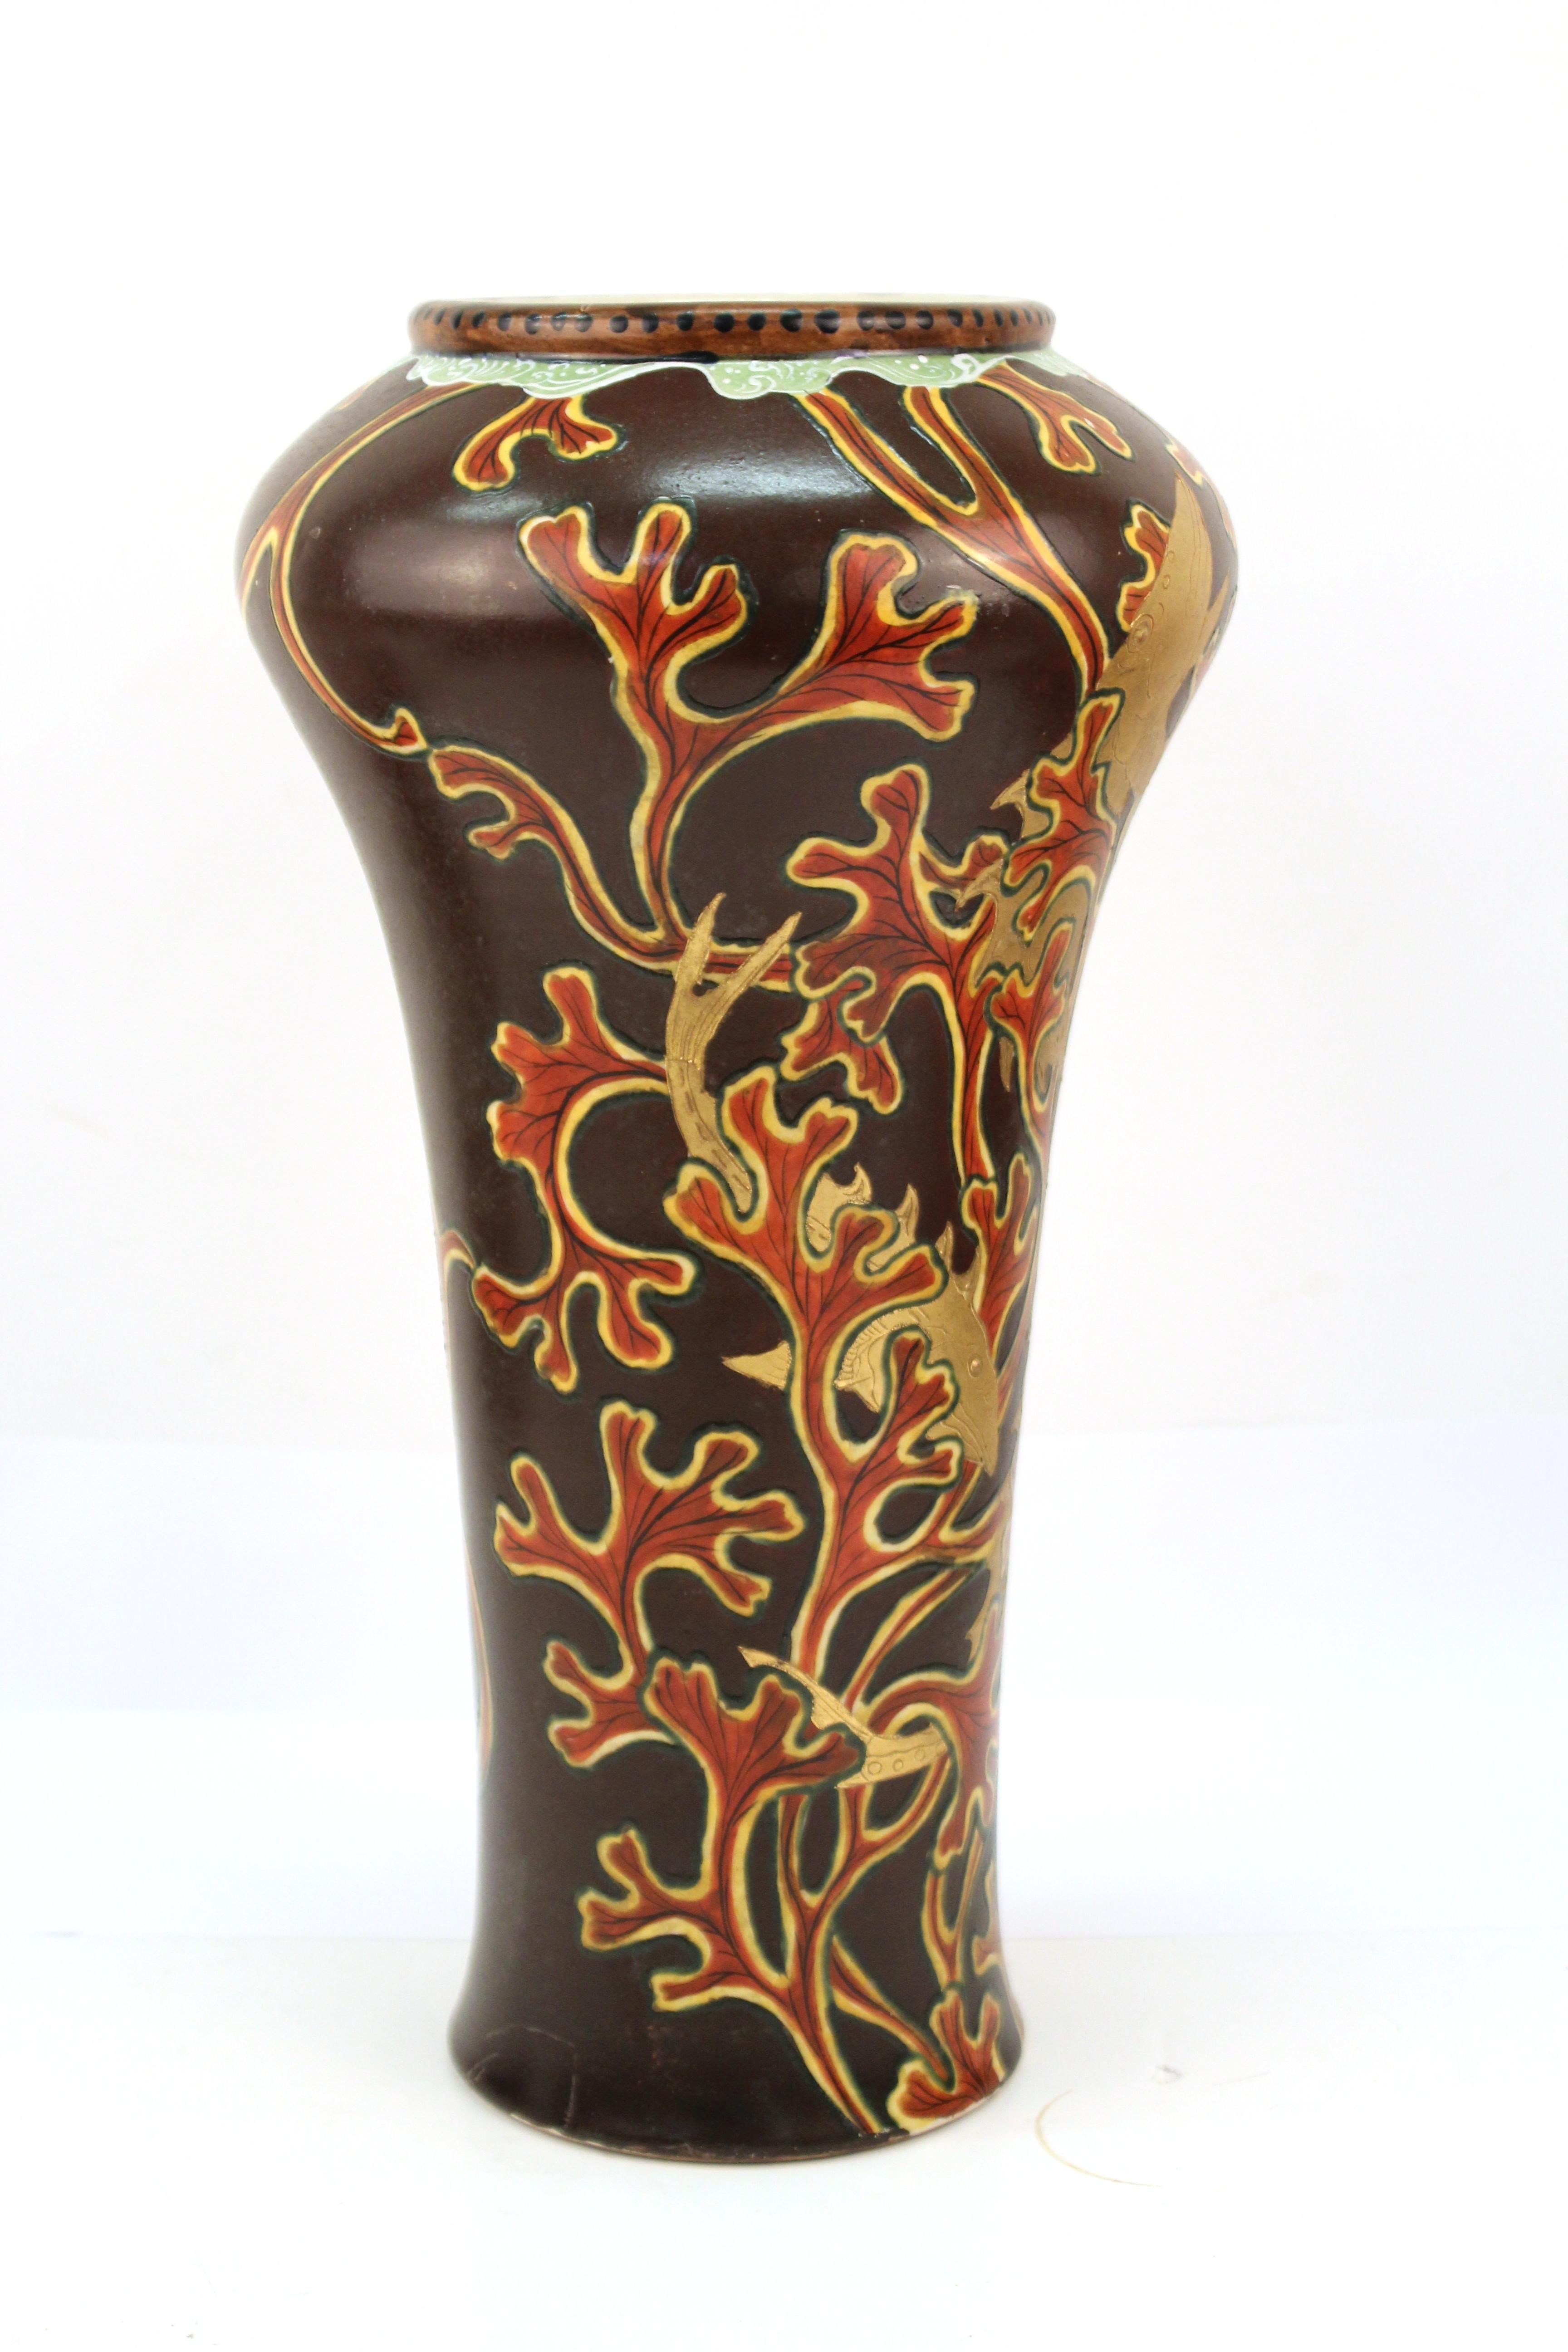 Japanese Meiji period Satsuma vase in lacquered porcelain with decorative gold fish and red coral motif. The piece was made in circa 1900 and has marks on the bottom. In great vintage condition with age-appropriate wear and use.